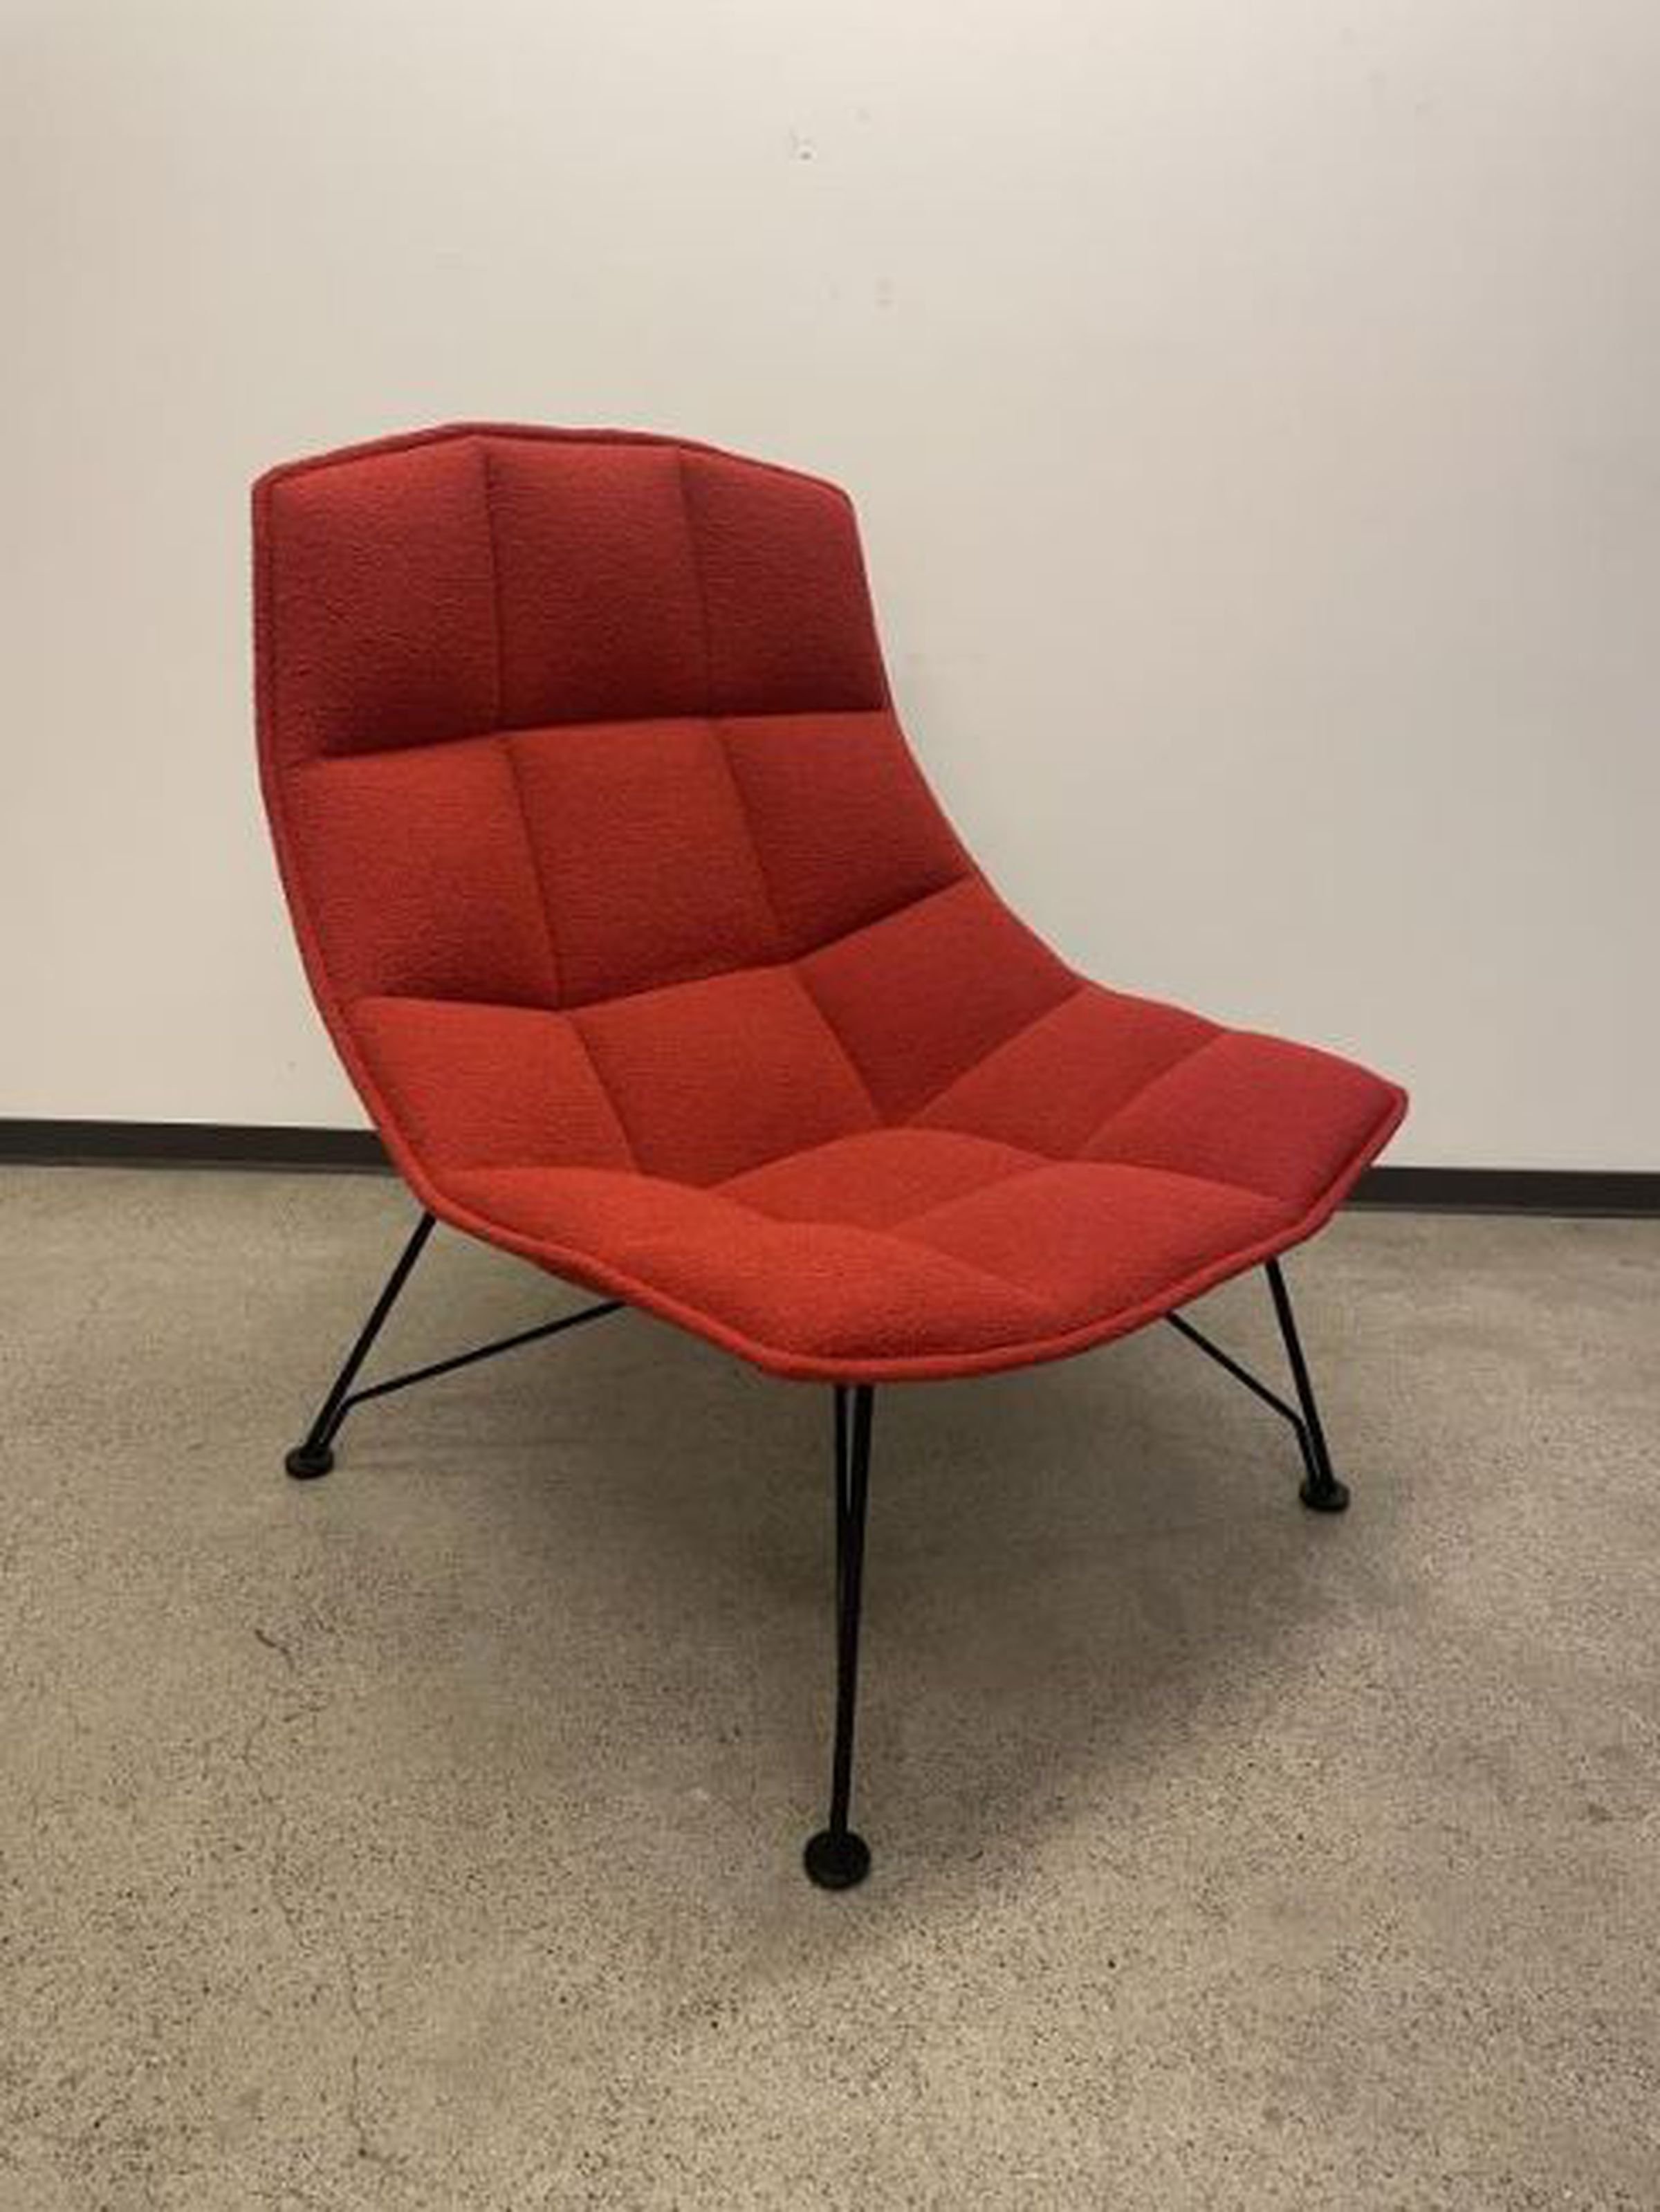 A red Knoll Studio 2009 Jehs+Laub lounge chair